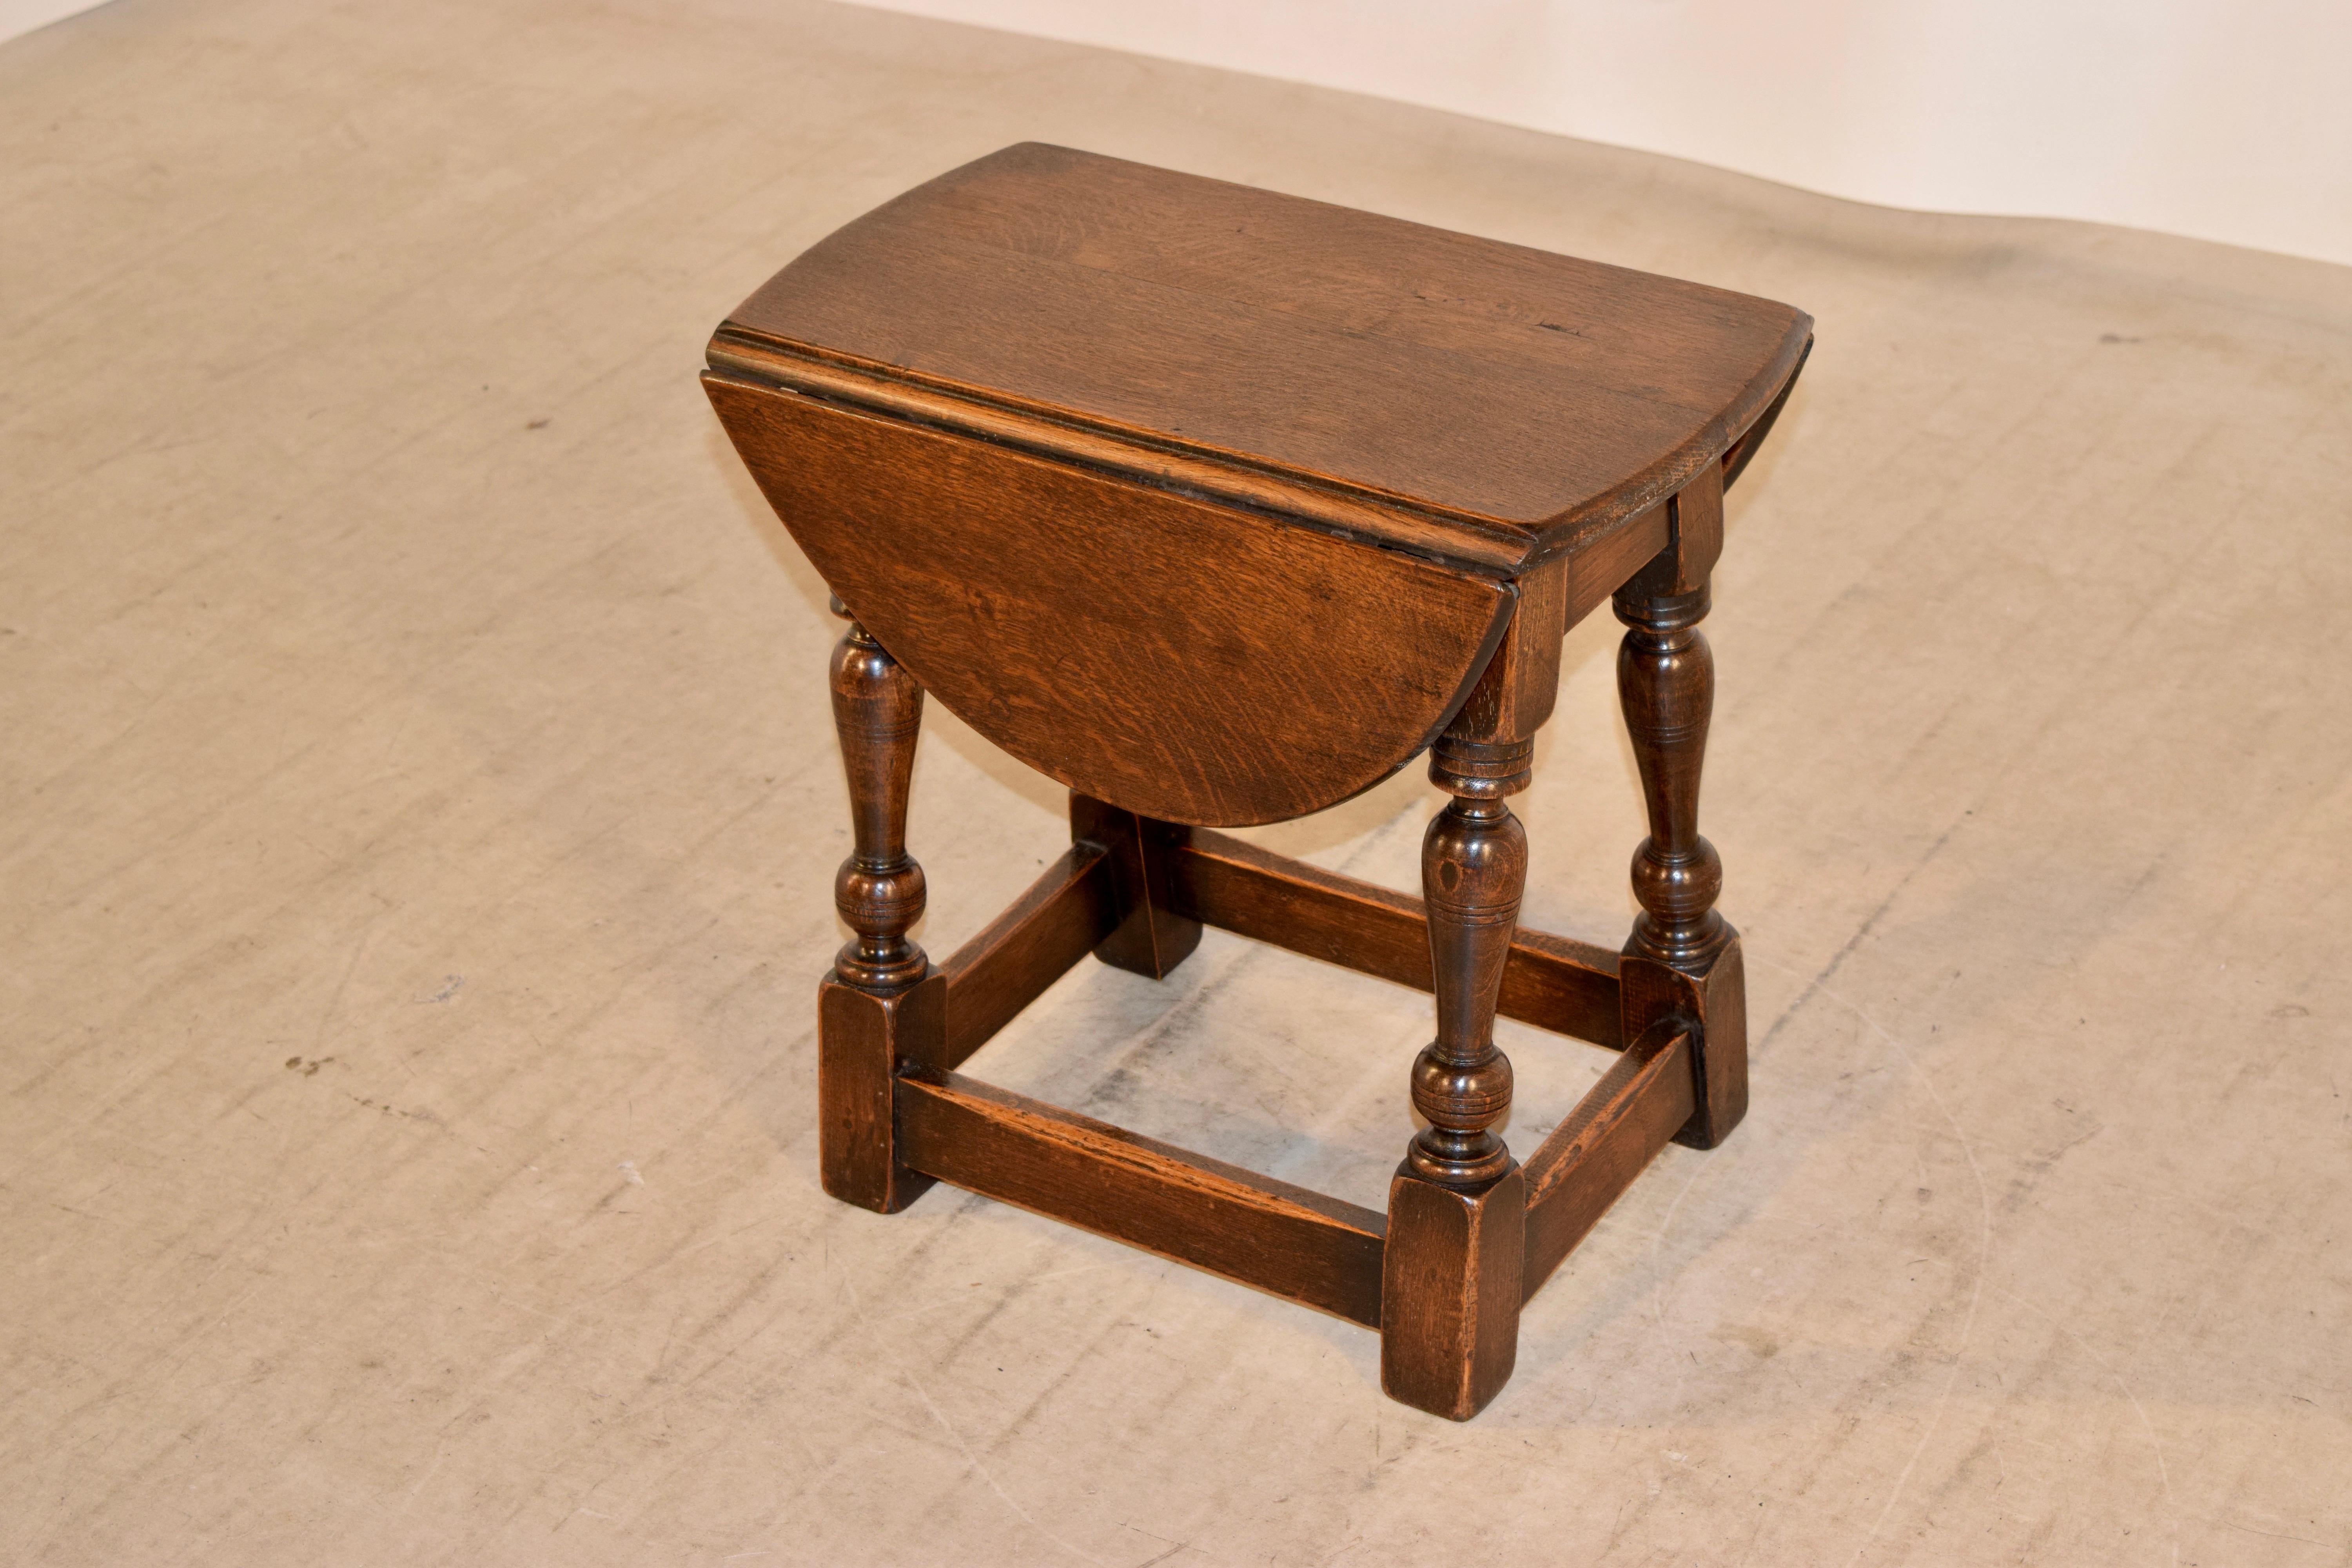 English 19th Century Small Drop-Leaf Table